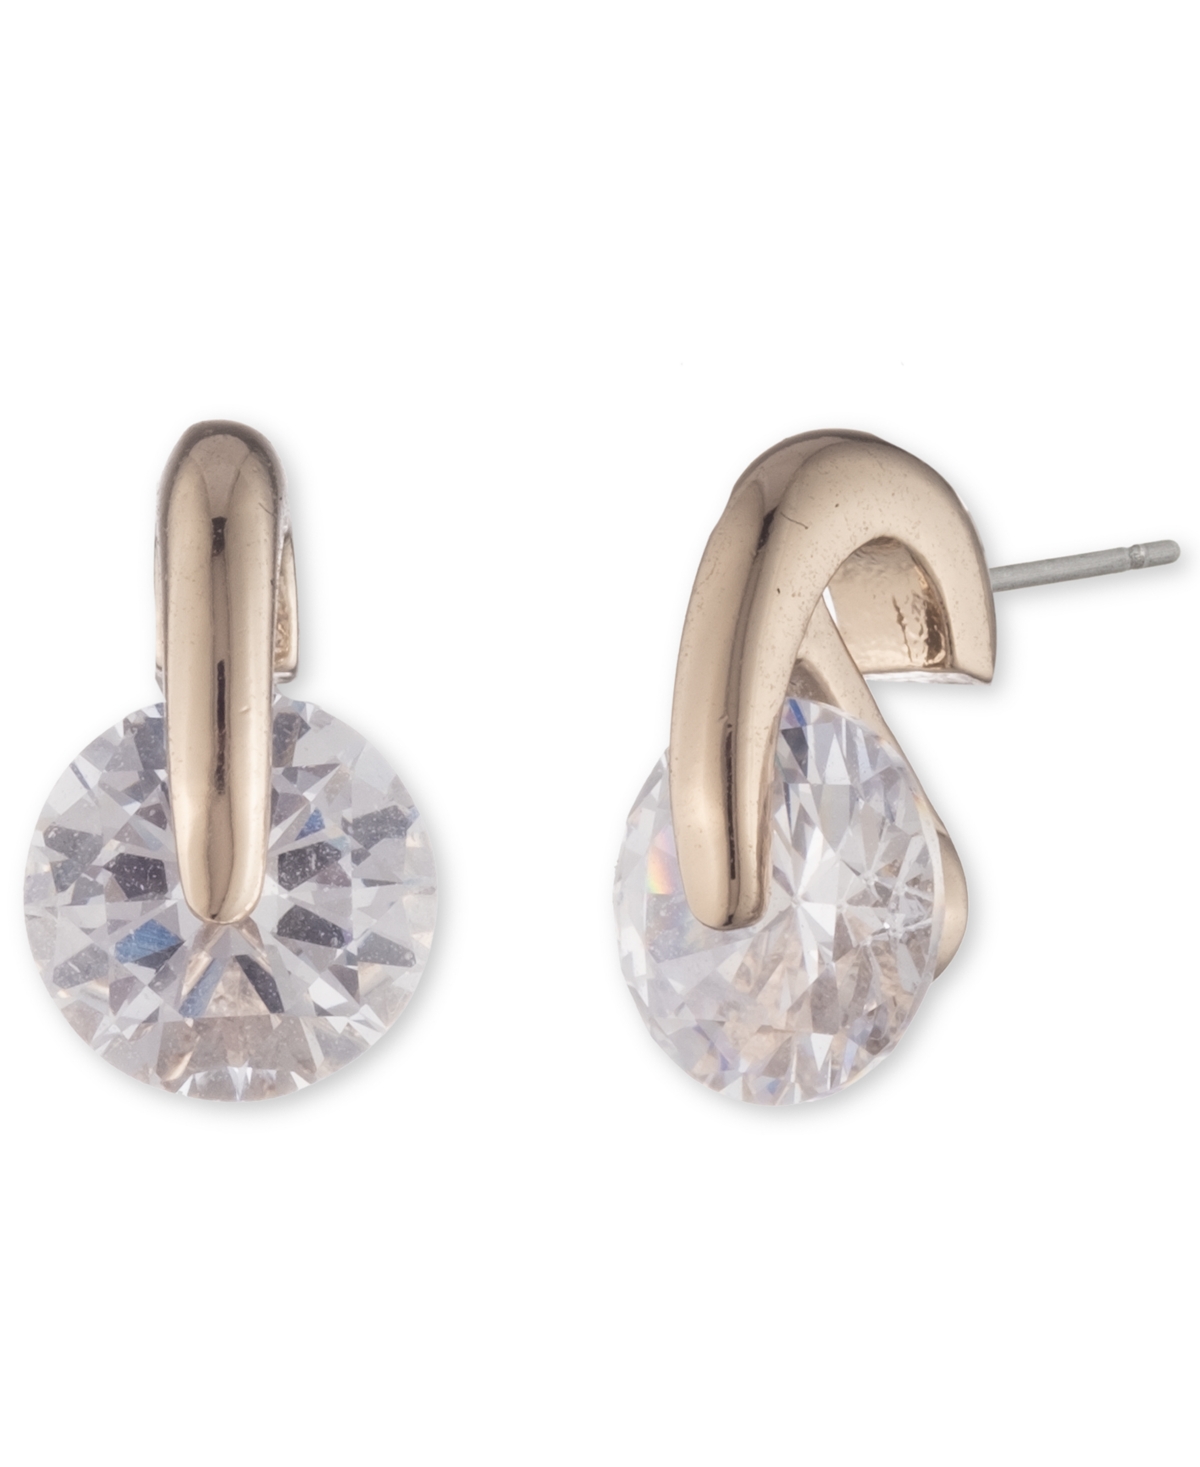 Givenchy Earrings, Crystal Accent In Clear